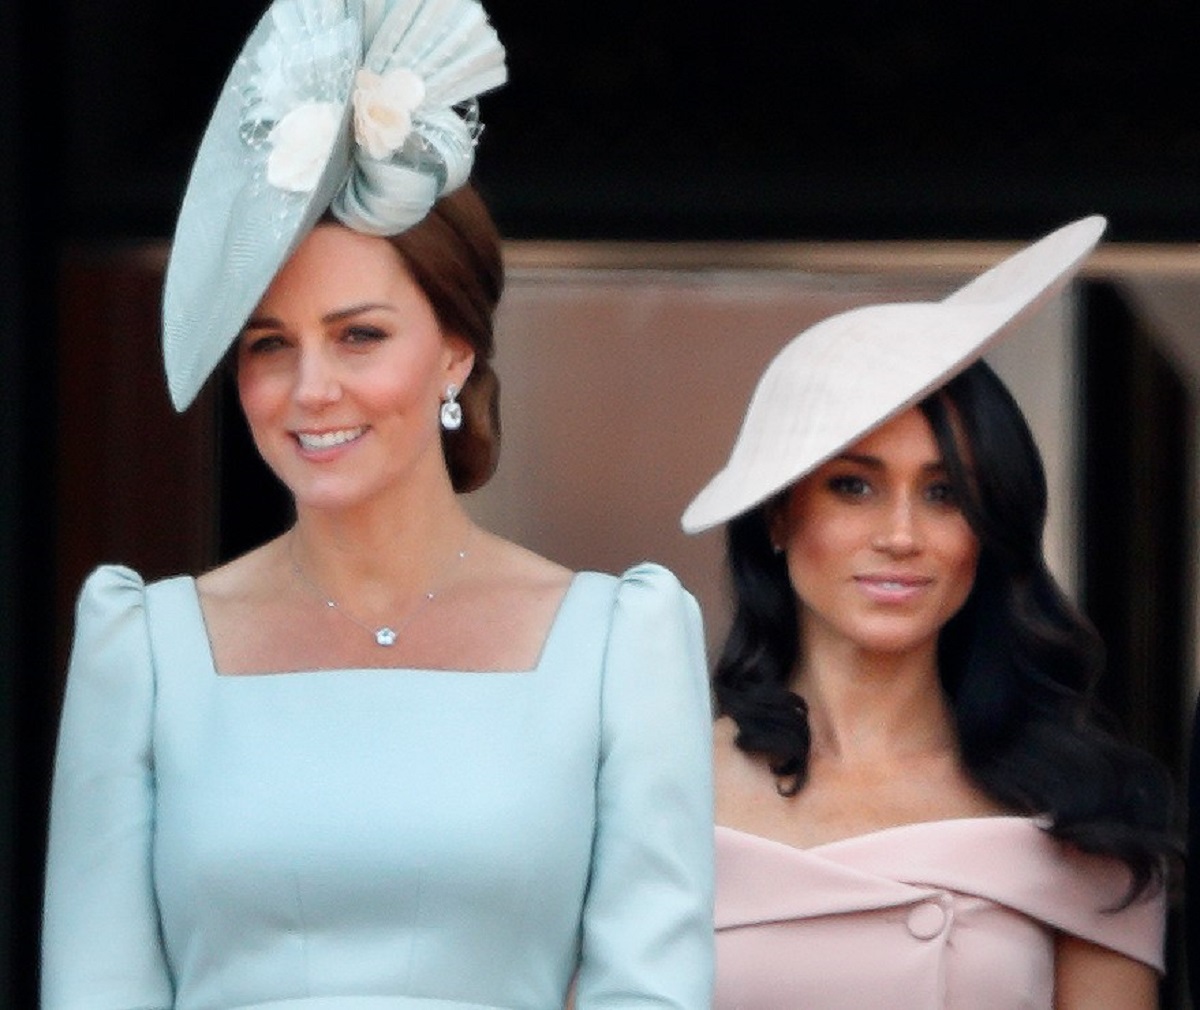 Commentator Says Jewelry Queen Elizabeth Gave Kate Compared to What She Gave Meghan Proves Duchess Never Made It to the ‘Royal Bling Ring’